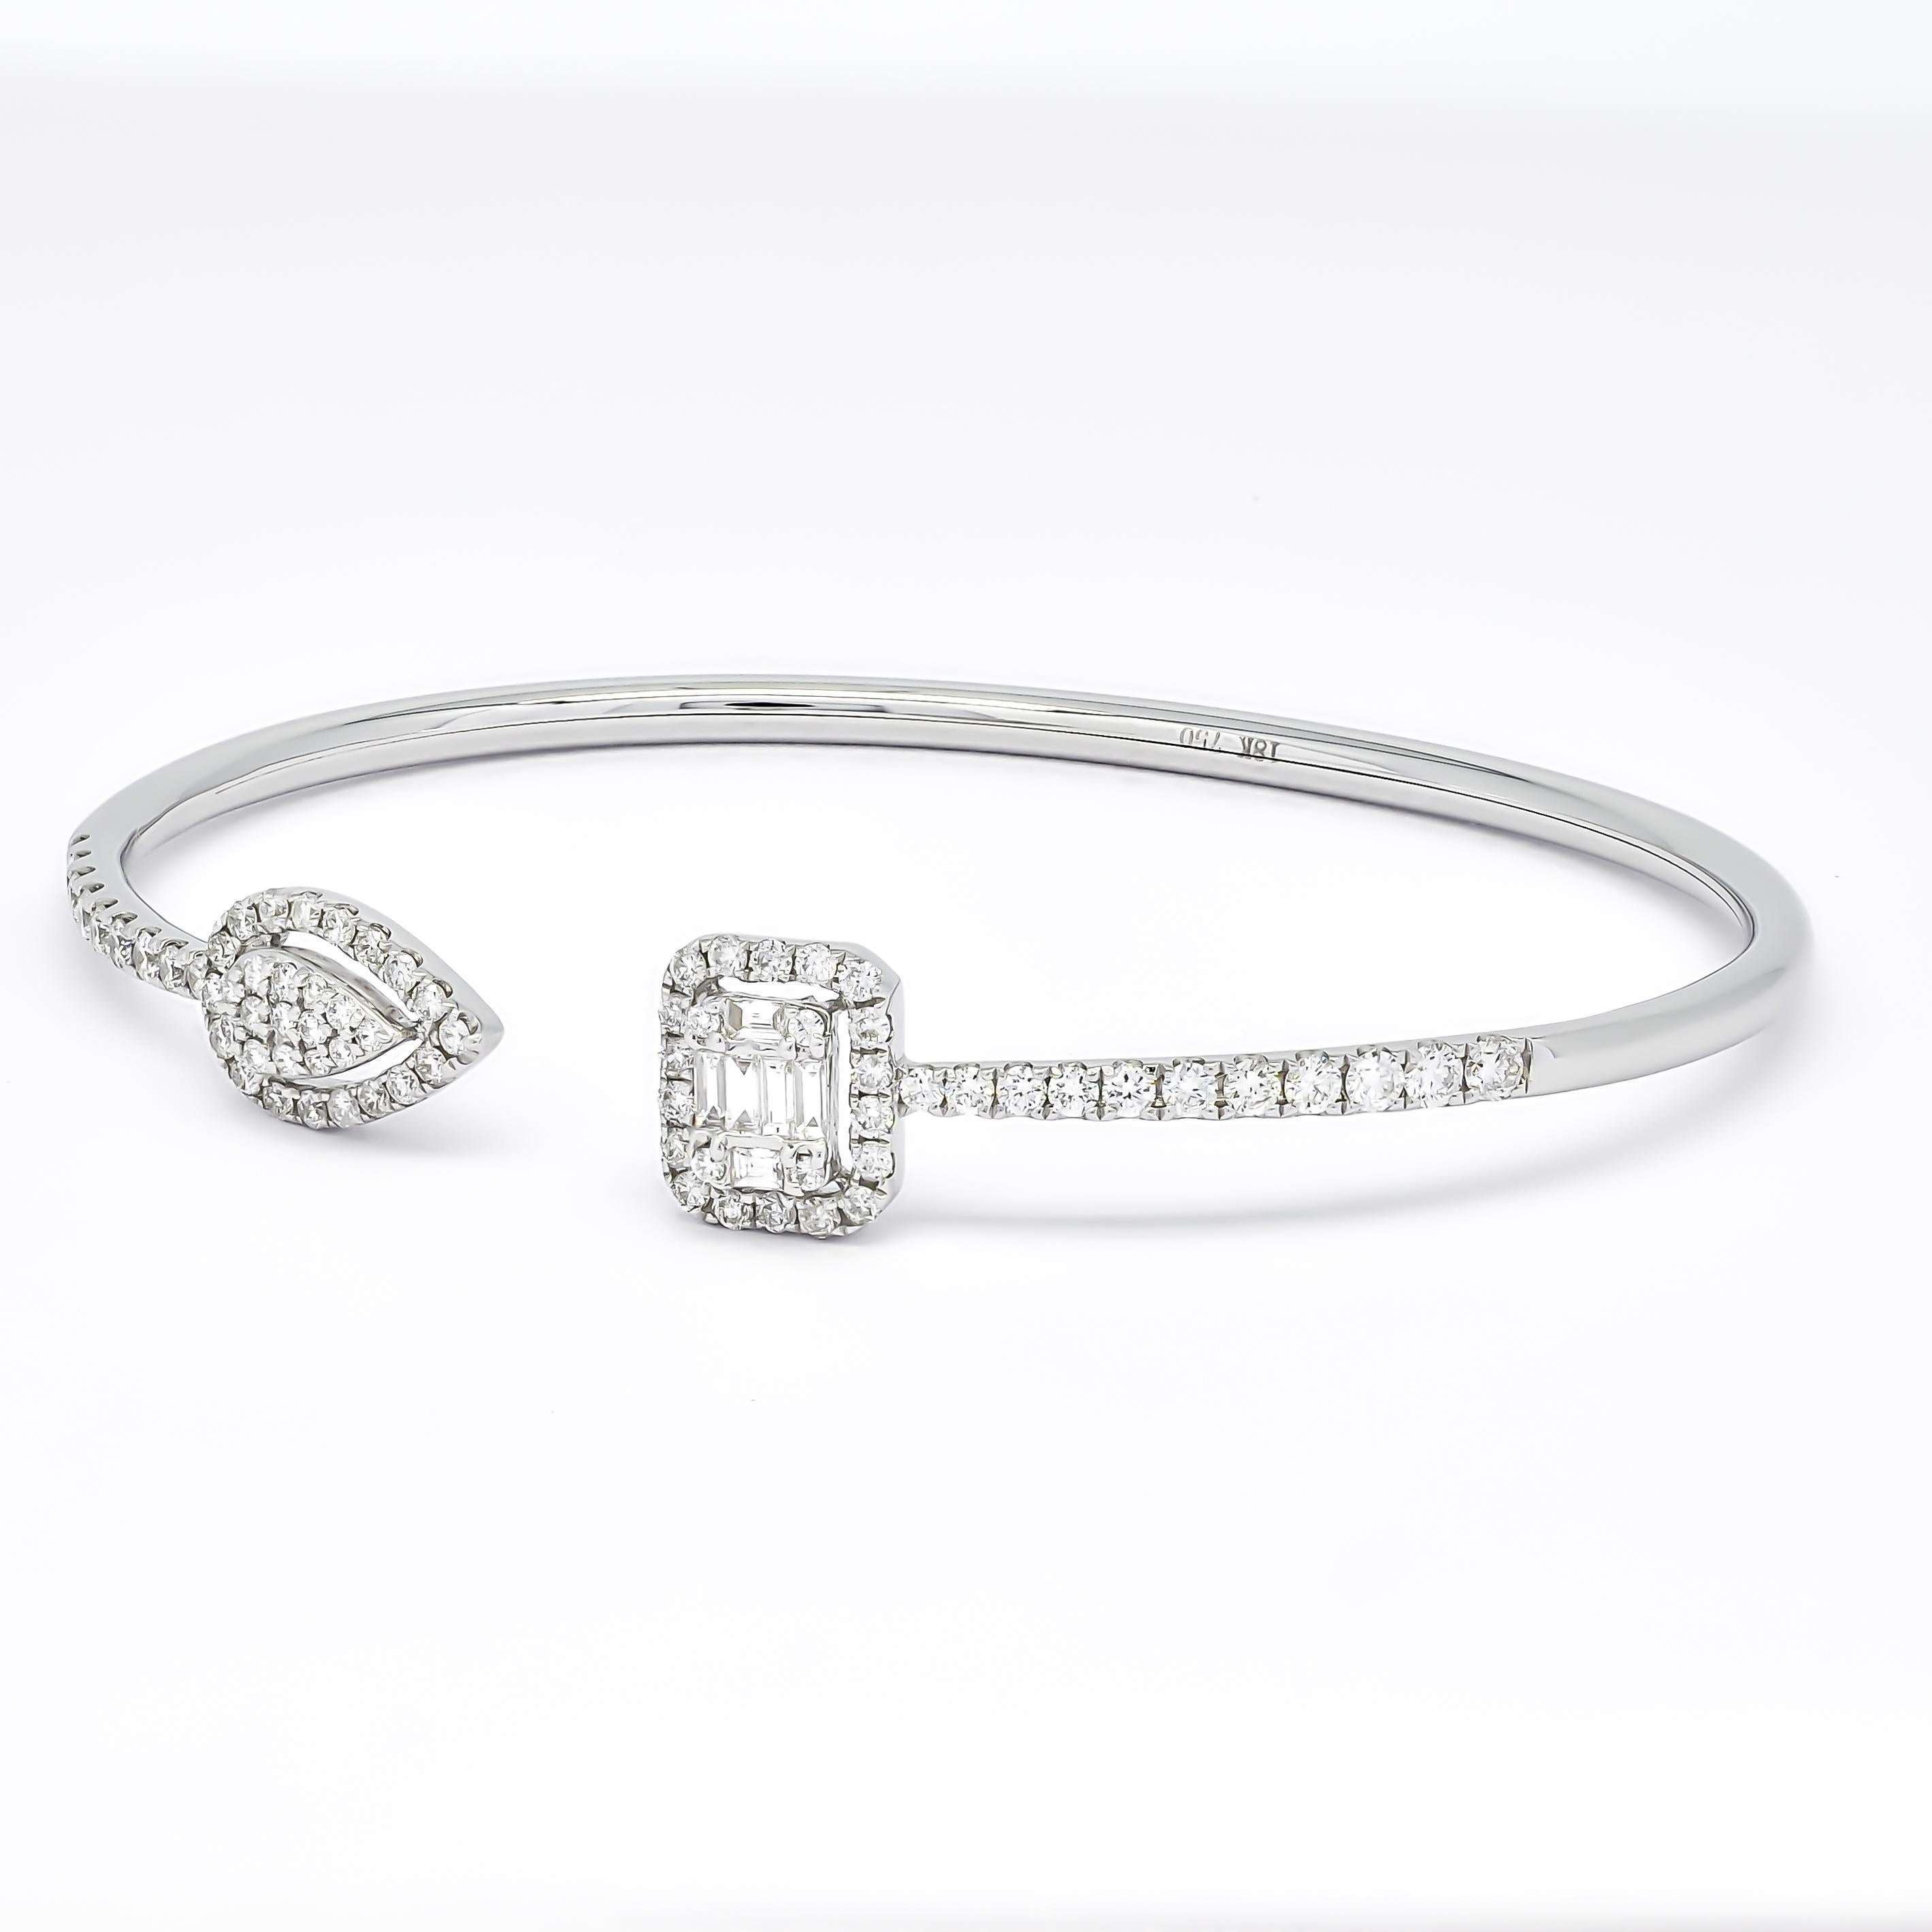 Fall in love with the stunning 18KT Gold Multi Shape Cluster Halo Diamond Woman Flex Cuff Open Bangle Bracelet. Crafted from luxurious 18KT gold, this bracelet features a breathtaking array of natural diamonds arranged in a beautiful cluster halo